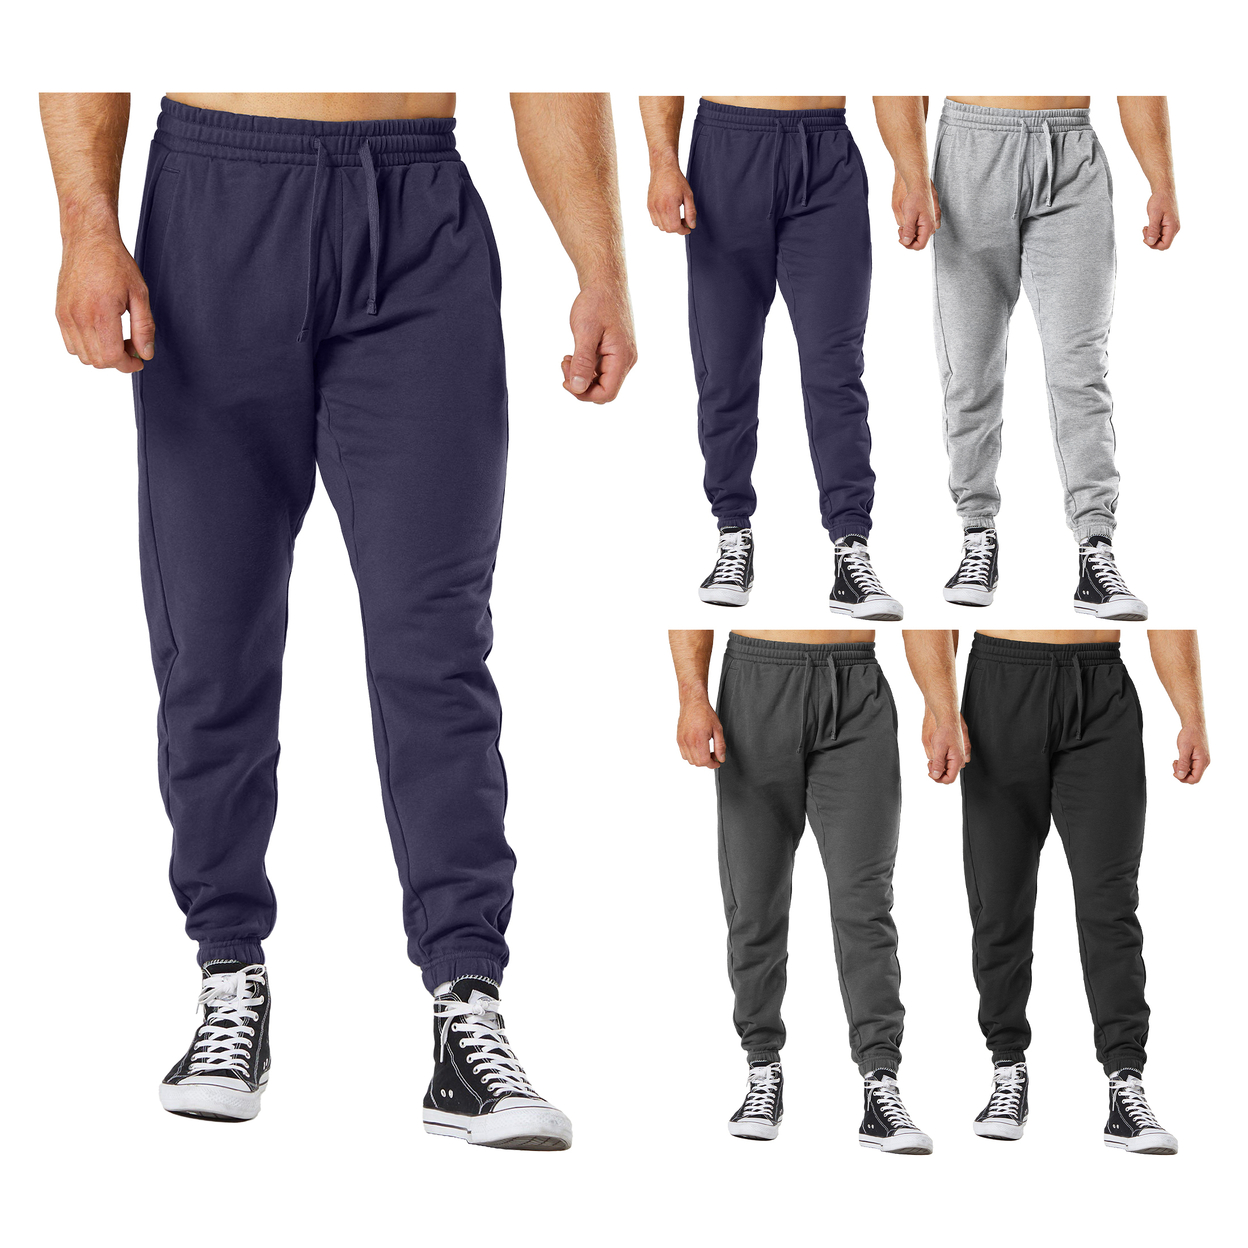 2-Pack: Men's Ultra-Soft Cozy Winter Warm Casual Fleece-Lined Sweatpants Jogger - Black & Charcoal, Large